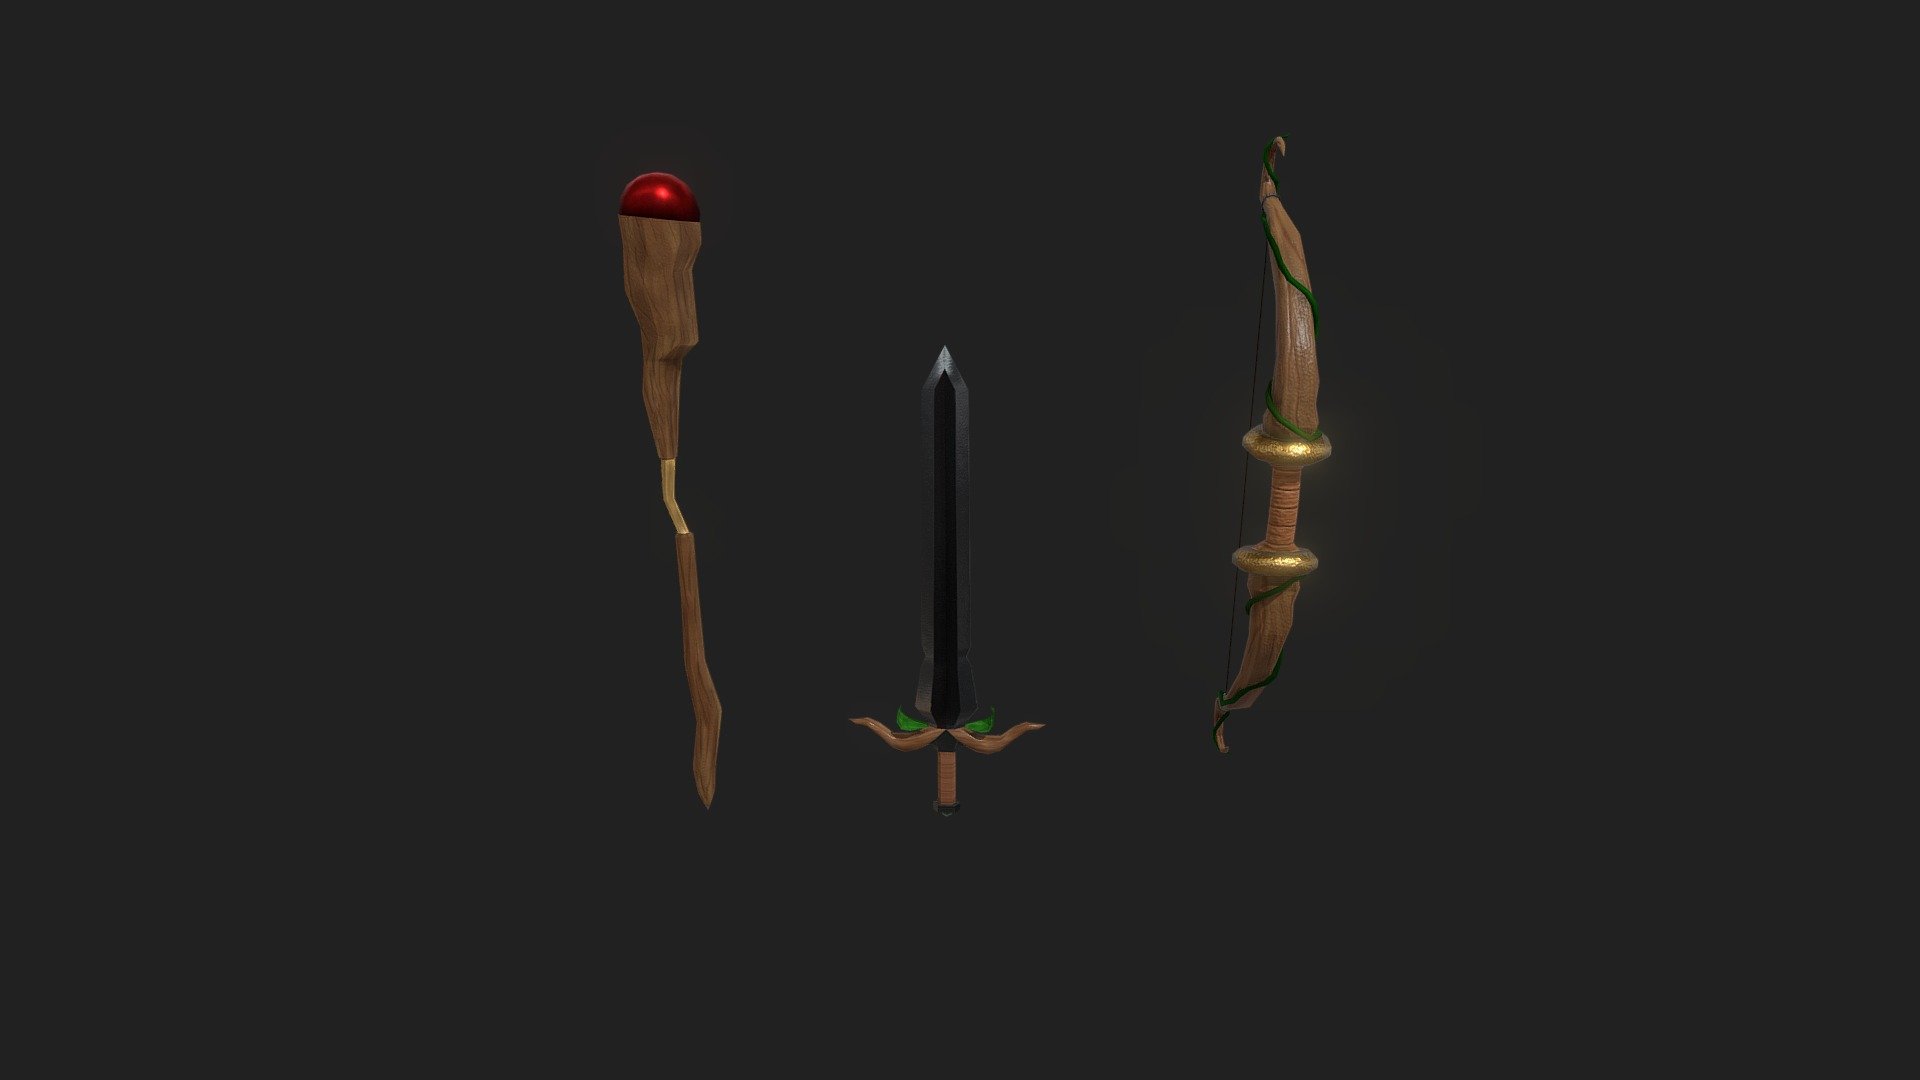 Fantasy weapons item set for my college portfolio - Weapons item set - 3D model by FortuneDrawing 3d model